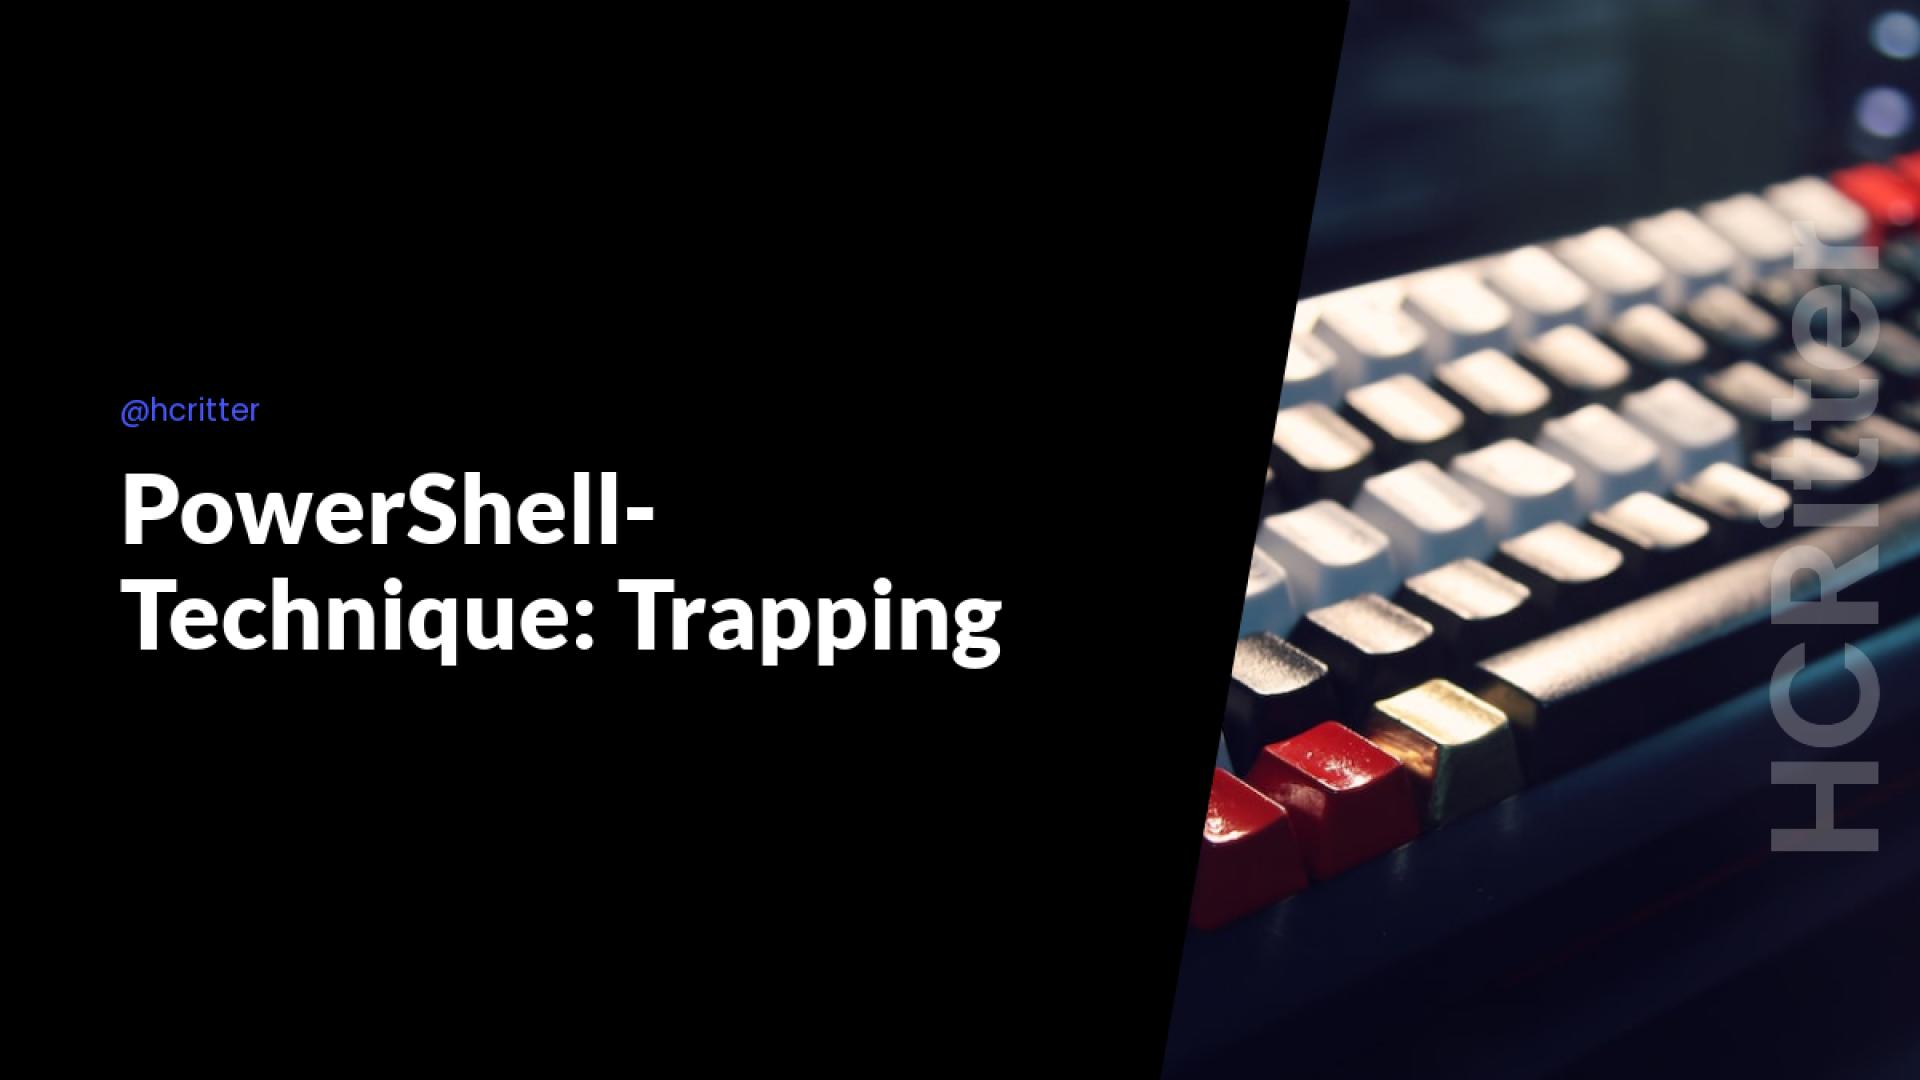 PowerShell-Technique: Trapping